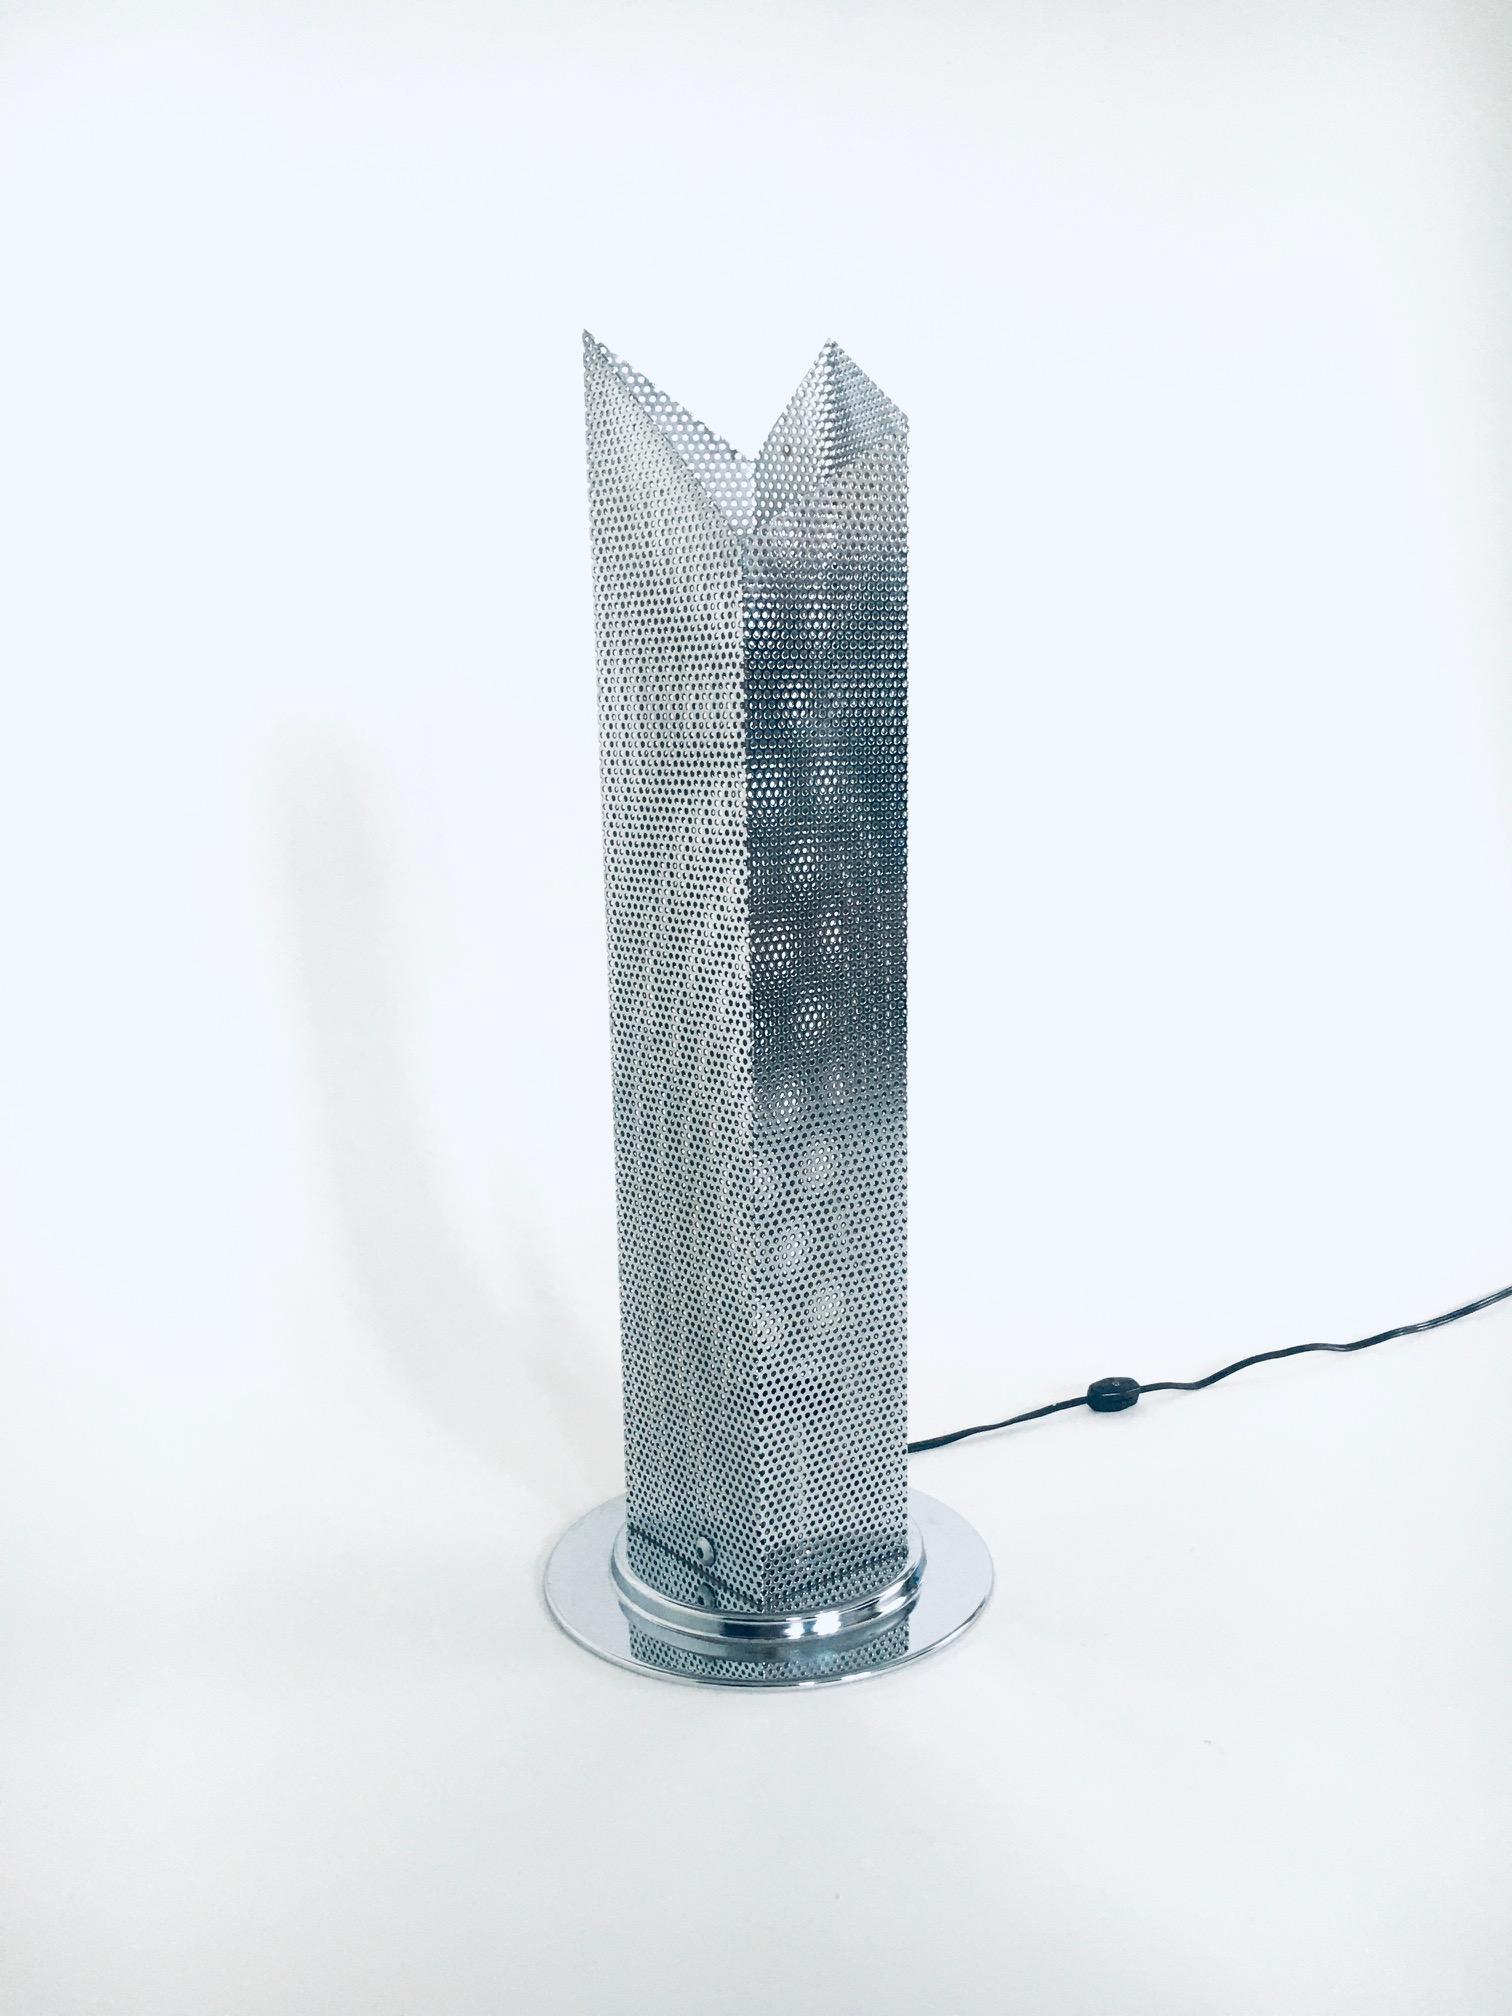 Vintage Postmodern Italian Design chrome steel perforated metal table lamp for IKEA, made in Italy 1980's. Architectural design table or floor lamp in perforated machine made steel metal folded sheets on round chrome metal base. Sky Scraper